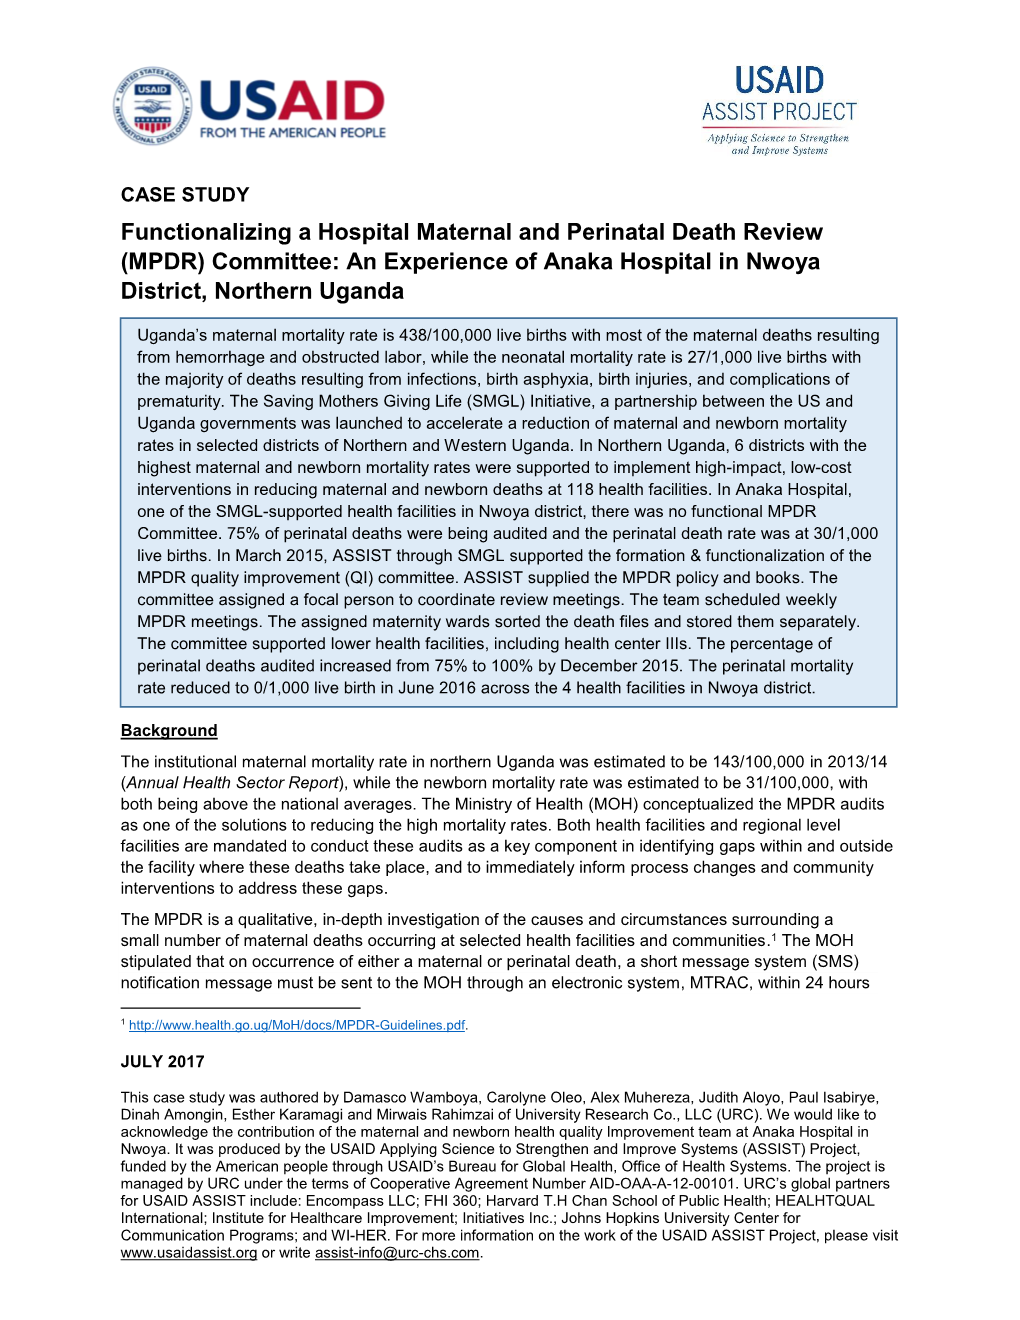 Functionalizing a Hospital Maternal and Perinatal Death Review (MPDR) Committee: an Experience of Anaka Hospital in Nwoya District, Northern Uganda